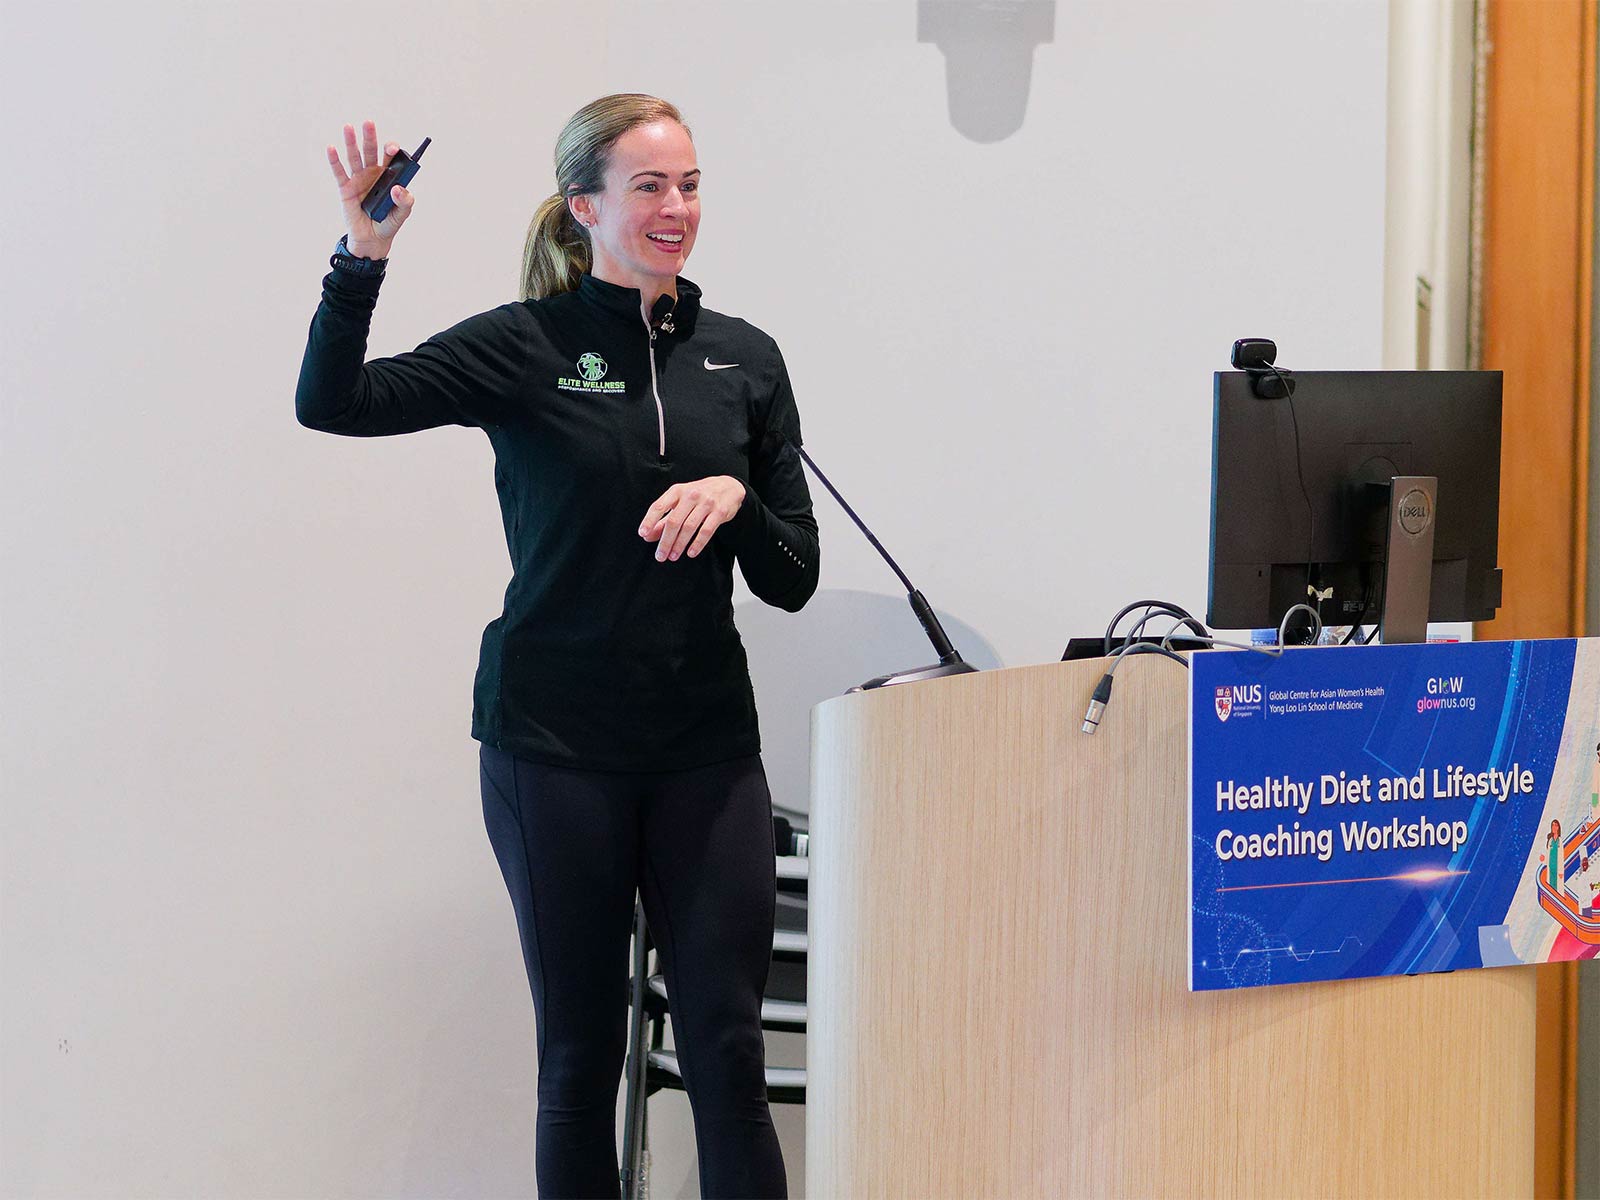 Ms Mckenna Smet, Certified Strength and Conditioning Specialist, US, shared about the use of novel technology to understand and promote physical activity, as well as the impact of food consumption and exercise.